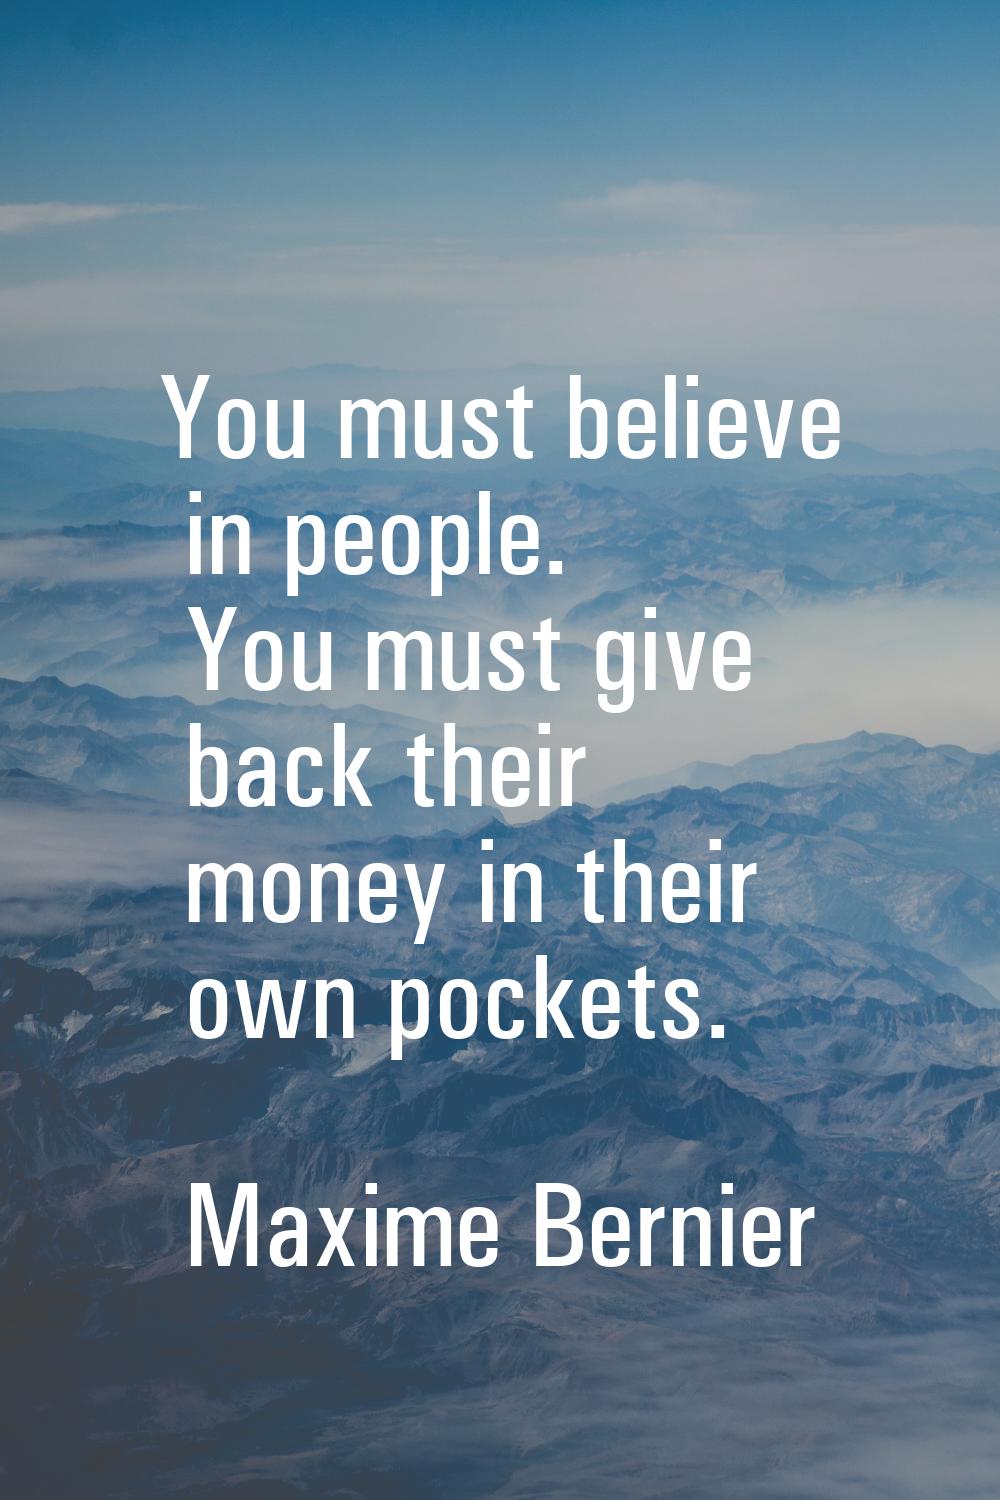 You must believe in people. You must give back their money in their own pockets.